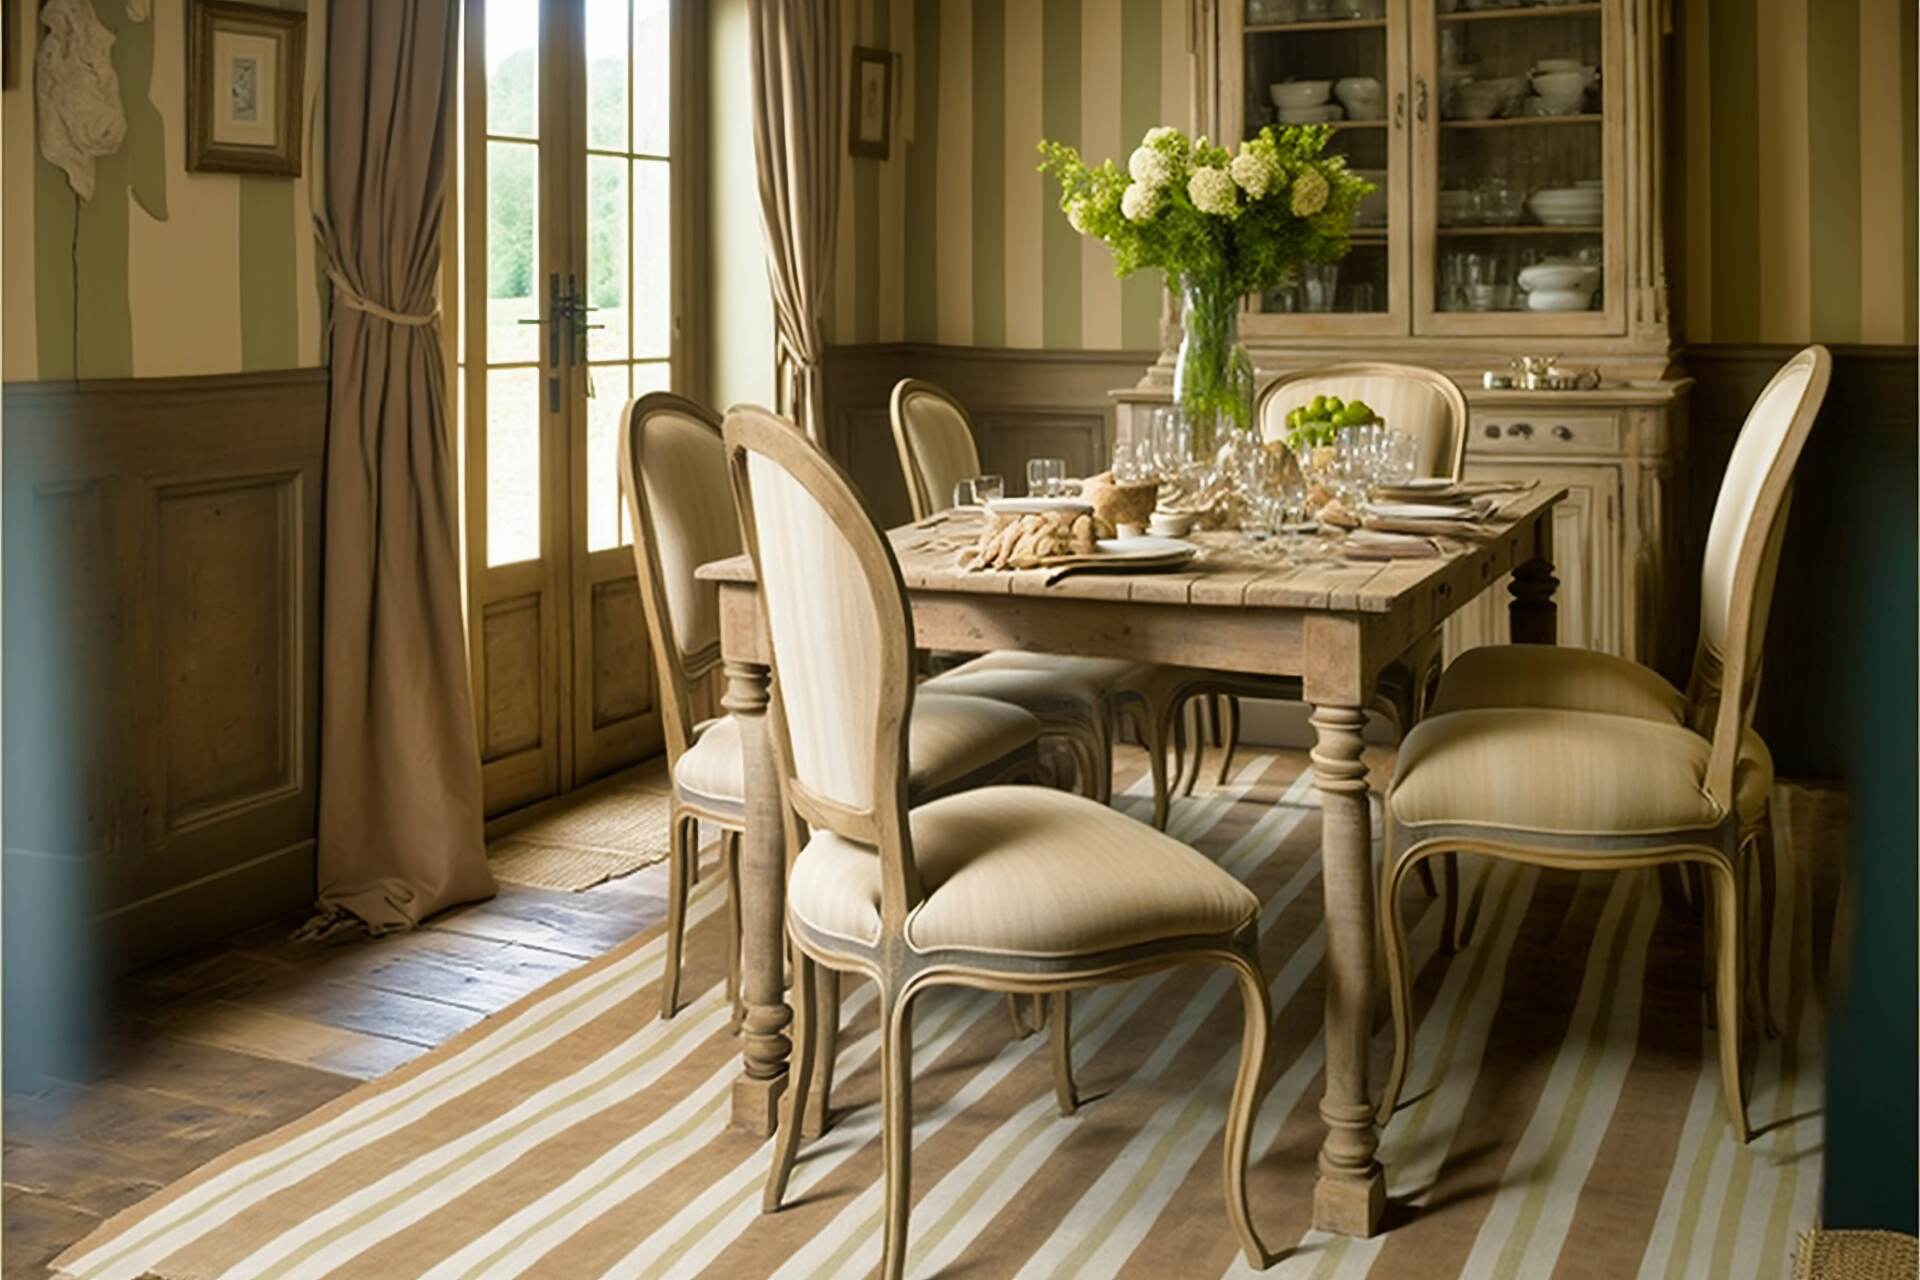 Refined Rustic In A French Countryside Dining Room